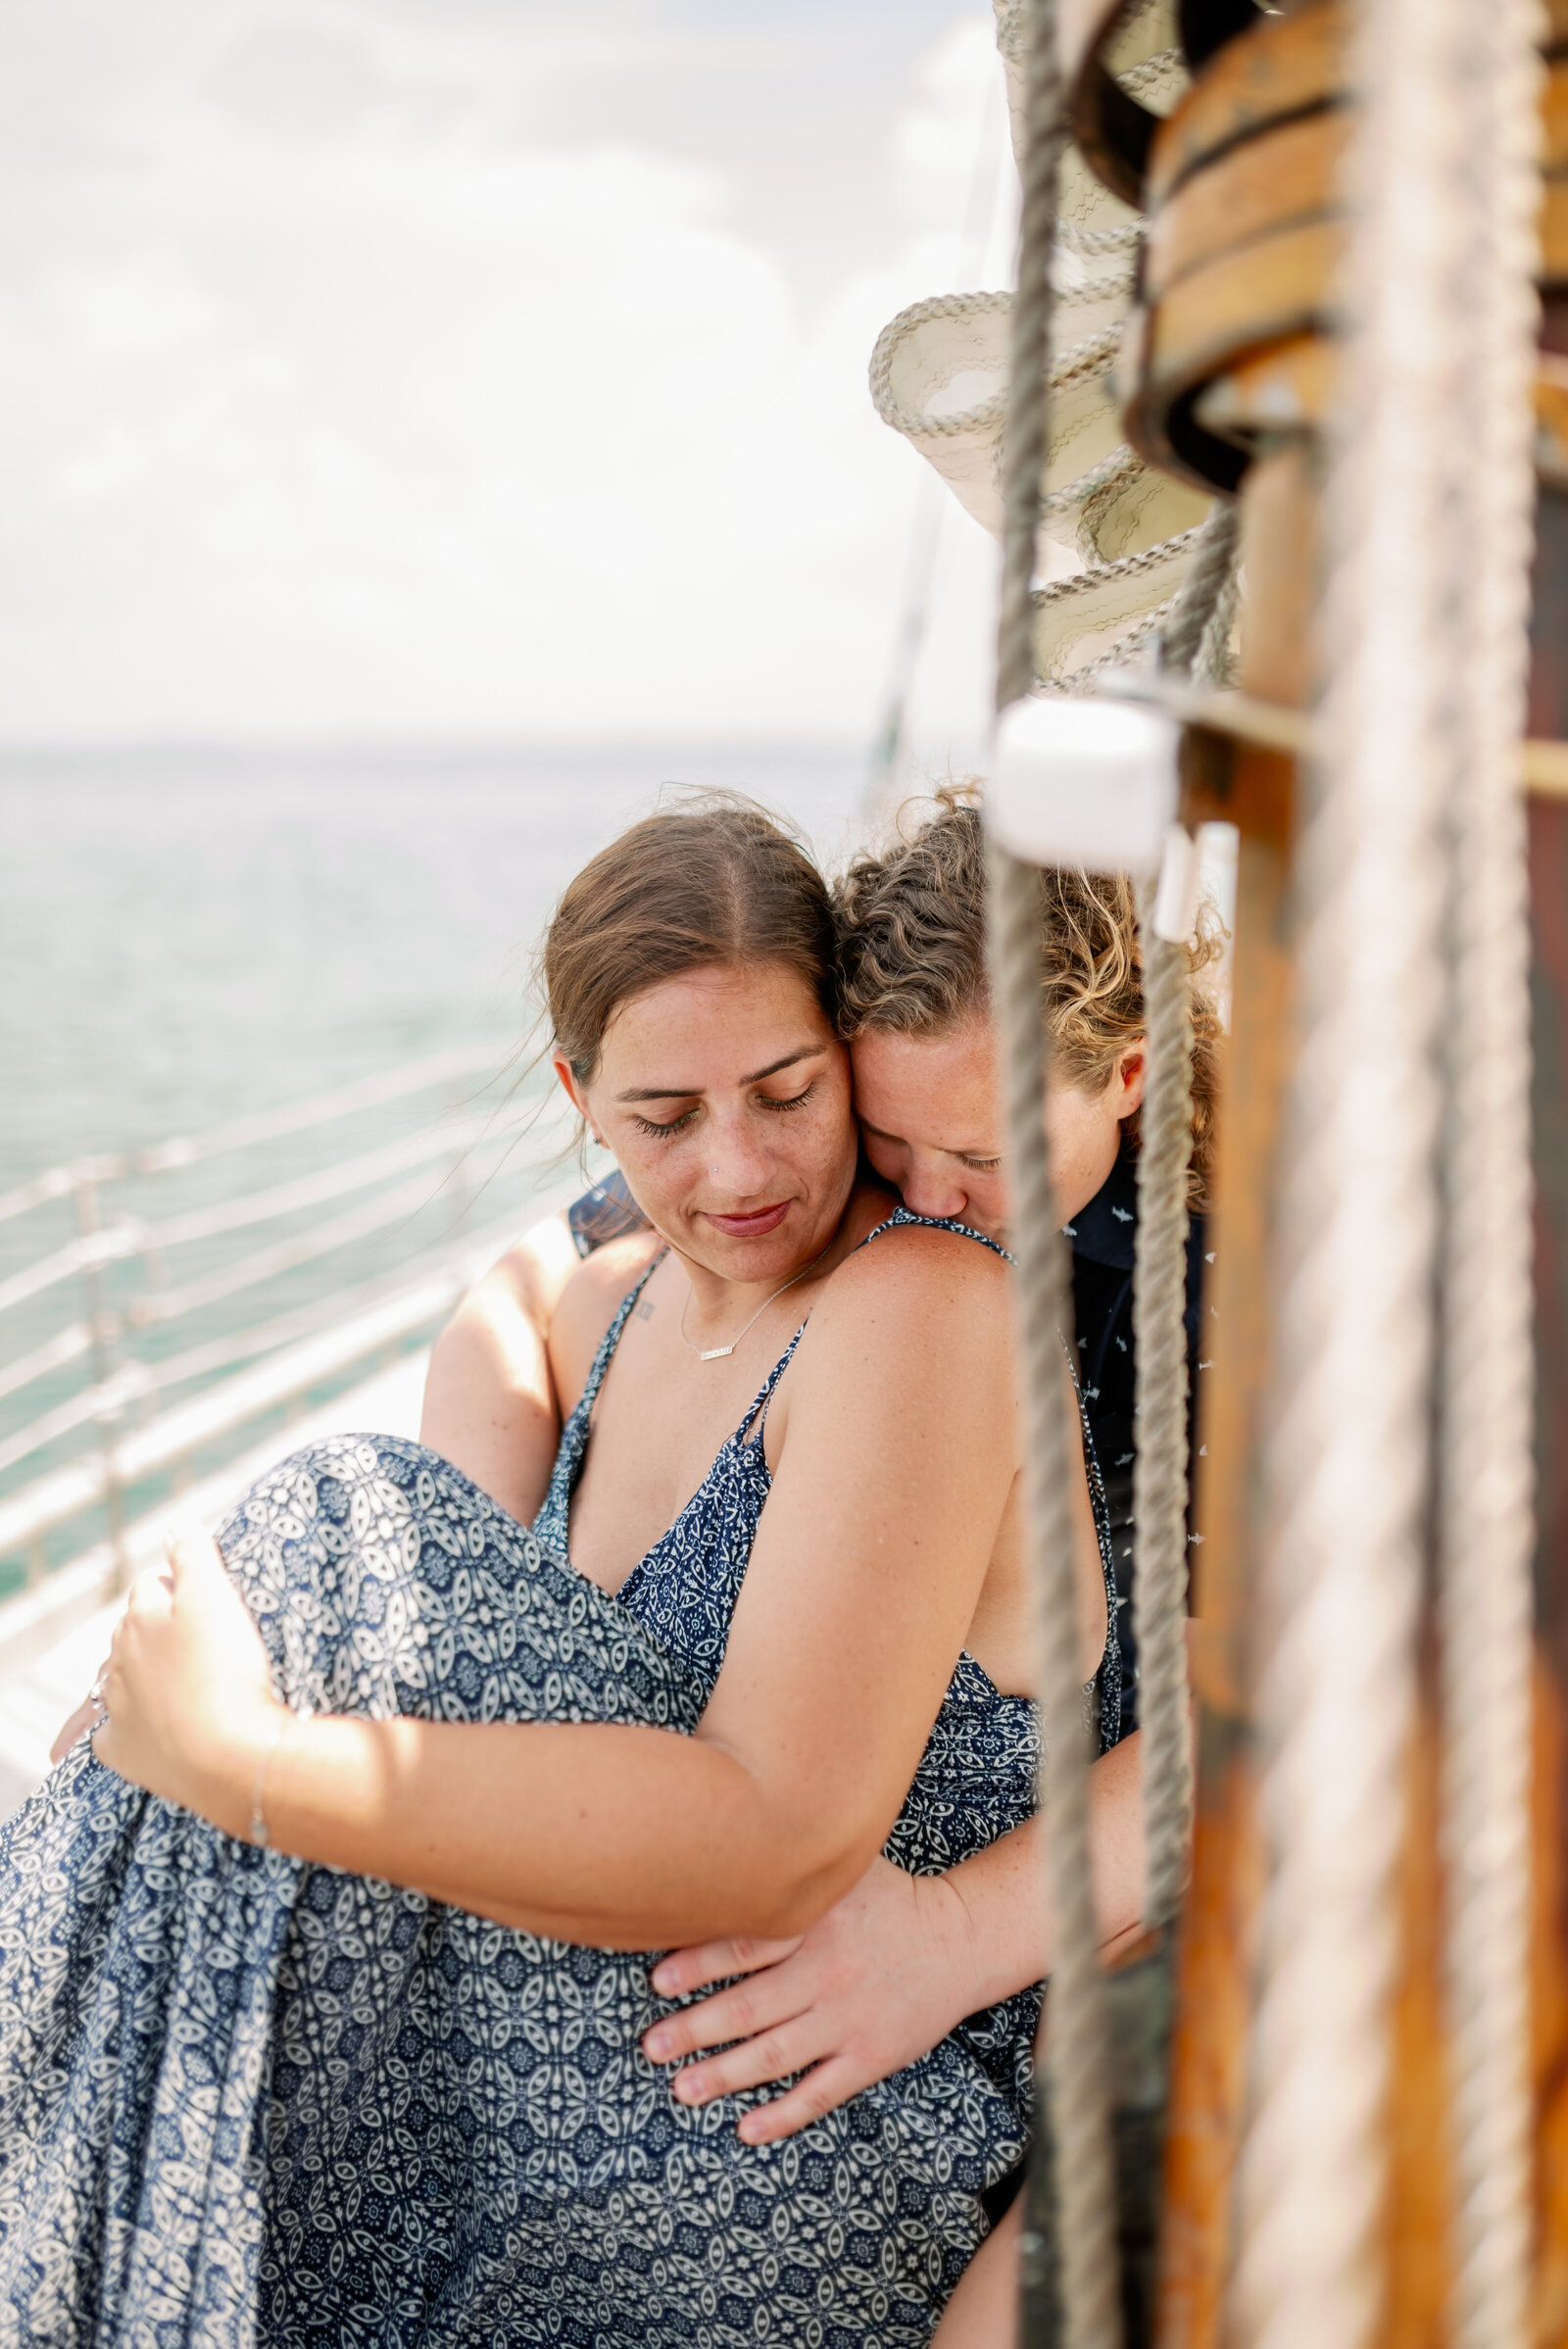 one women kissing the other on the shoulder, photographed from behind a sailboat rigging